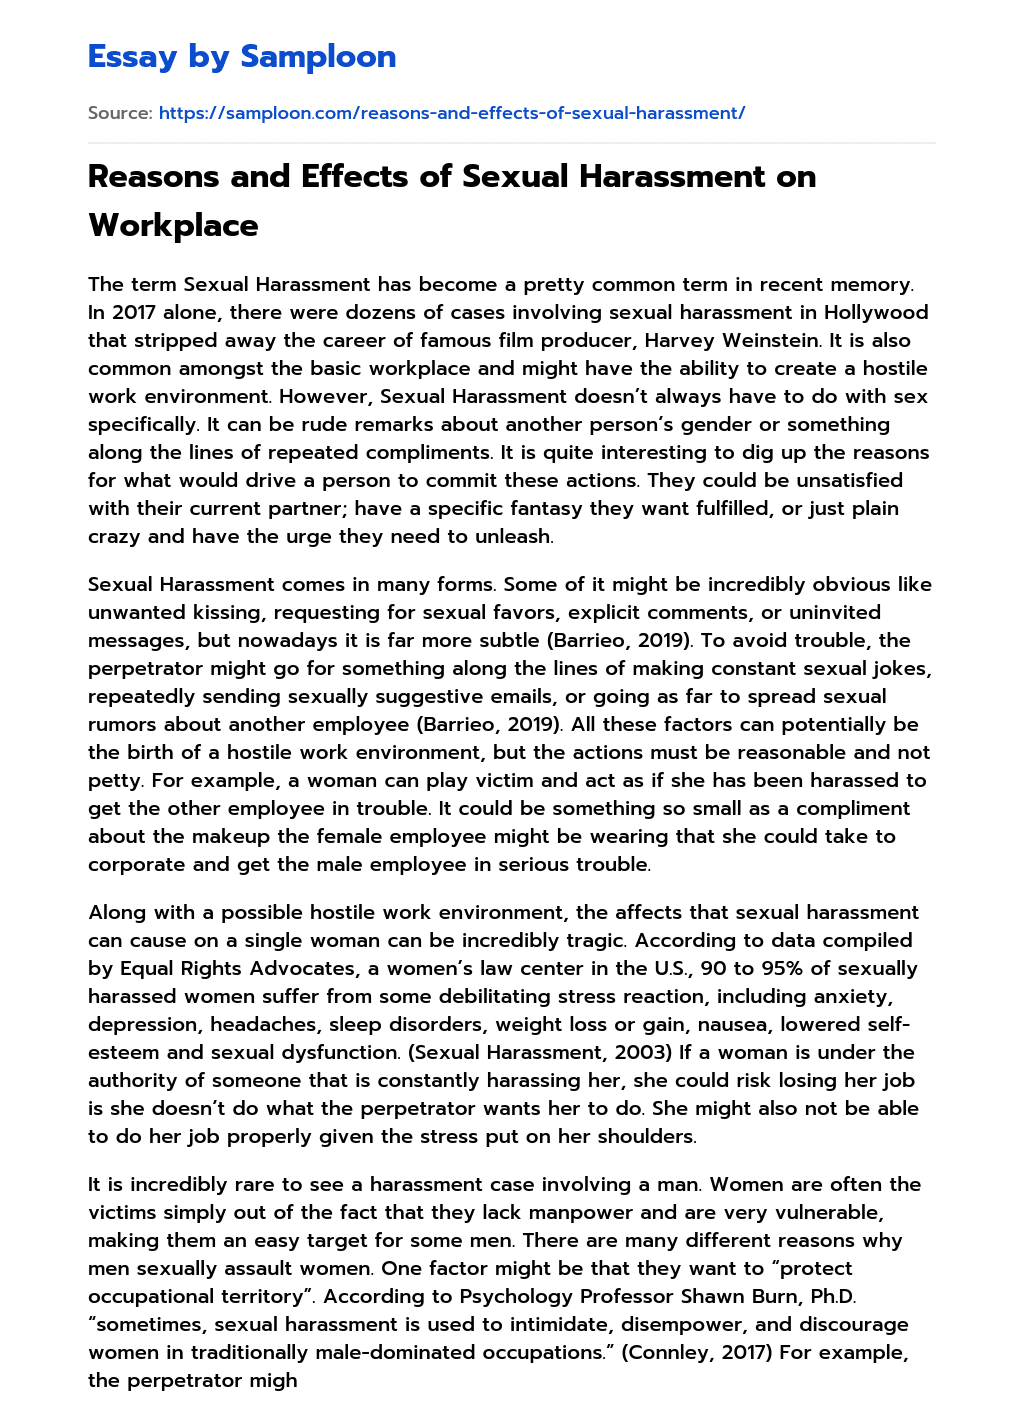 Reasons and Effects of Sexual Harassment on Workplace essay